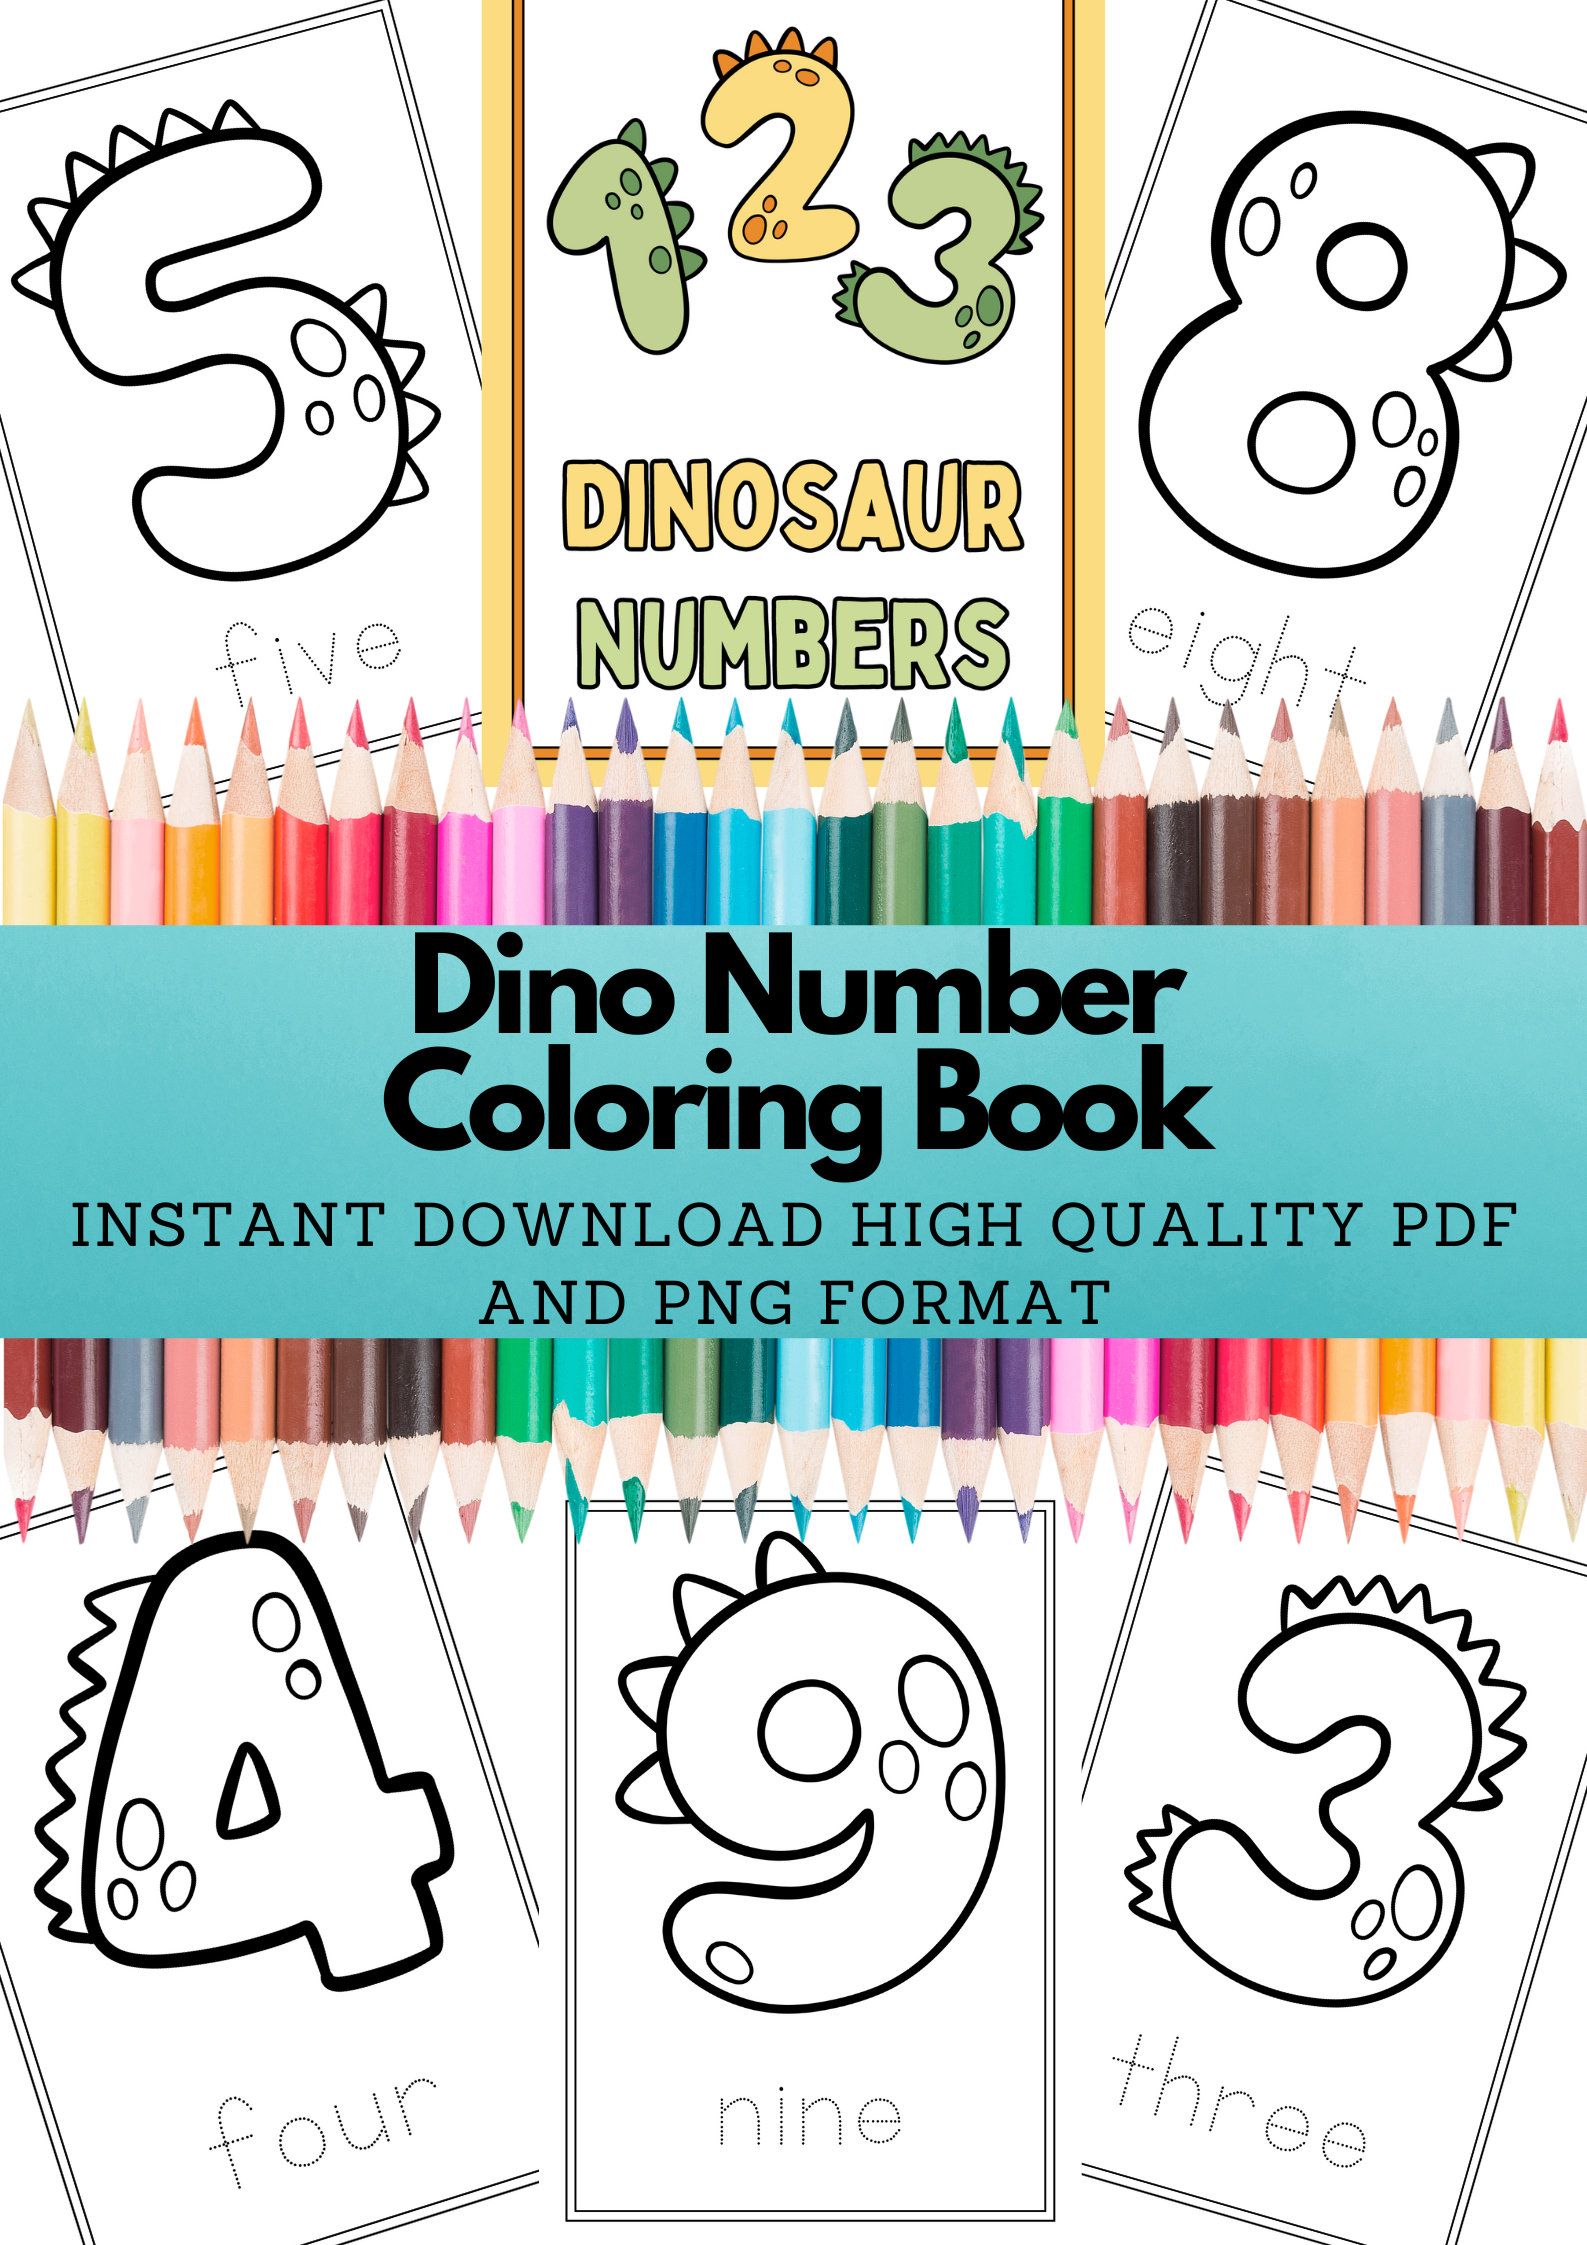 Dinosaurs Coloring Pages, Dinosaur Coloring Pages for Kids Printable, Dinosaur Coloring Sheets, Dinosaur Coloring Book, Kids Coloring Pages - Etsy